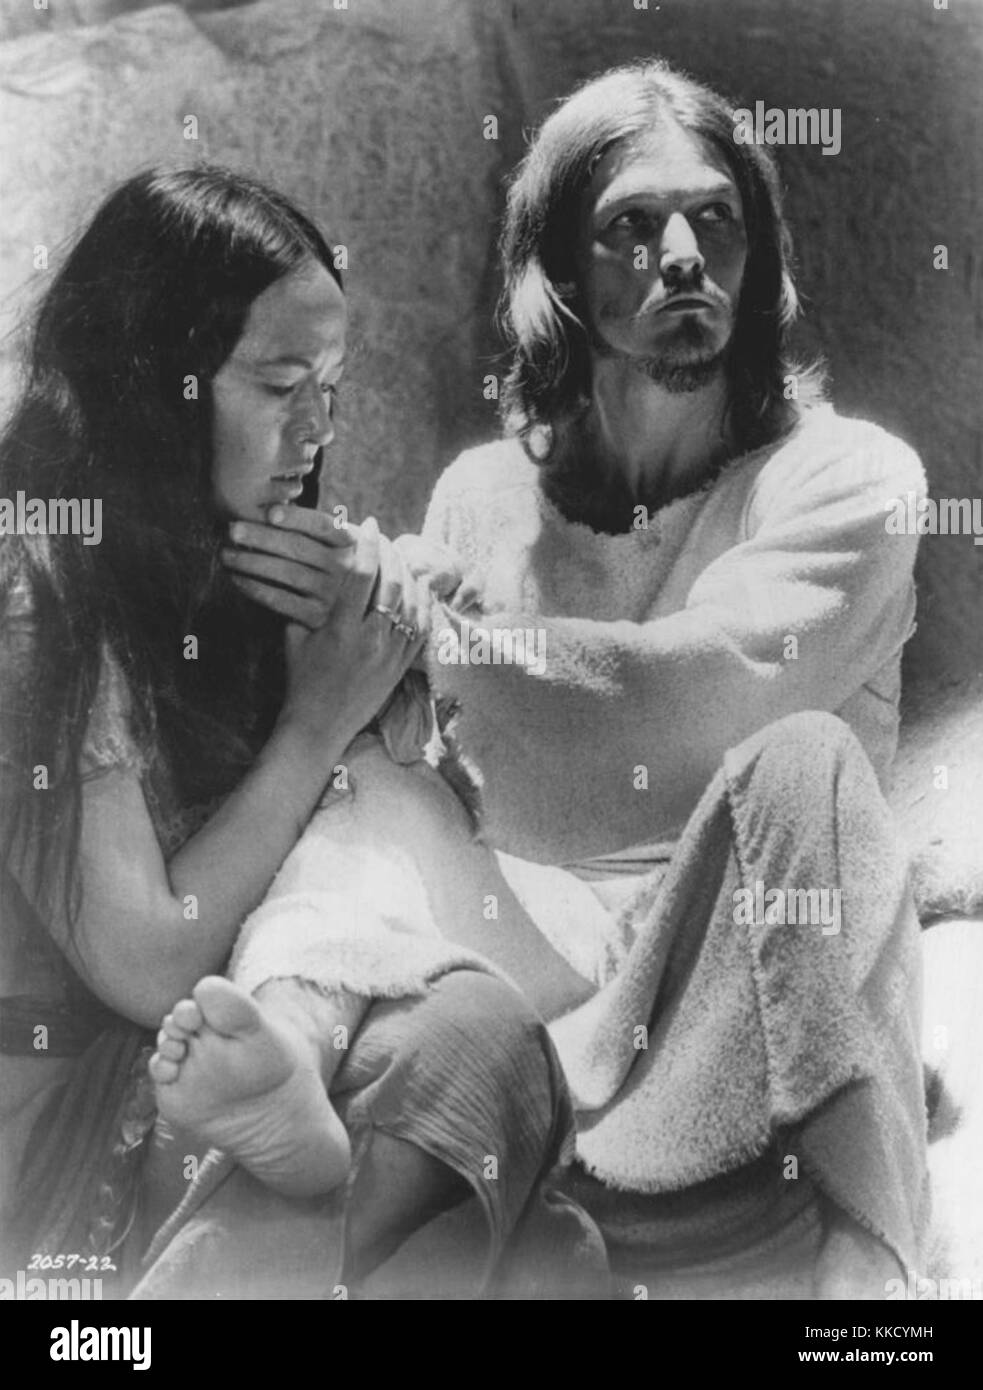 Subjects: Yvonne Elliman, Ted Neeley Program: :'Jesus Christ Superstar' on 'NBC Monday Night at the Movies' Time: NBC Television Network colorcast, Monday Oct. 11 (9-11 p.m. NYT0 Jesus Christ Superstar Elliman Neeley 1973 Stock Photo